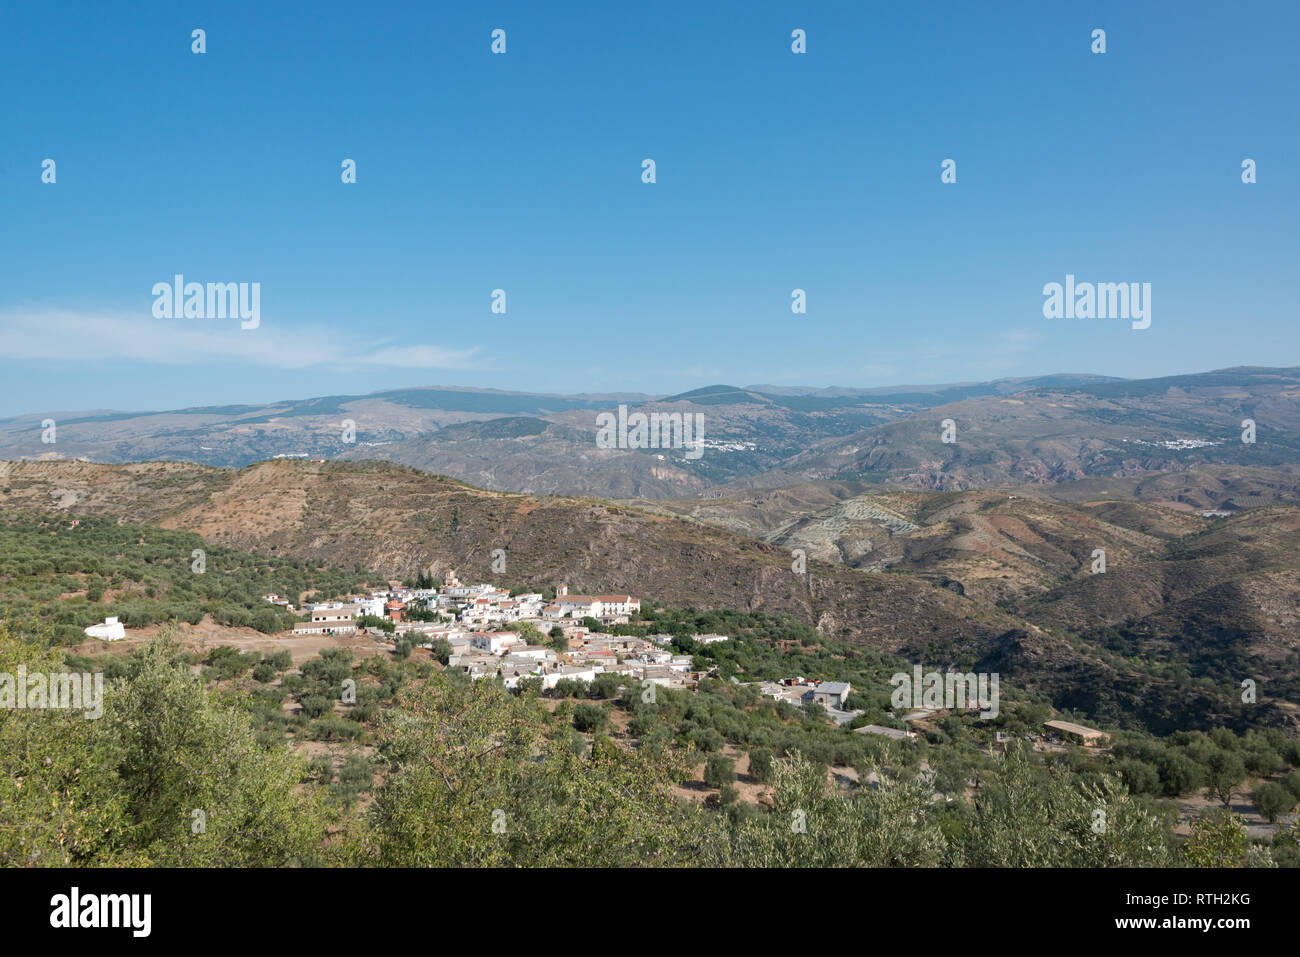 The town of Jorairatar in the Alpujarras mountains of Andalucia, Spain Stock Photo